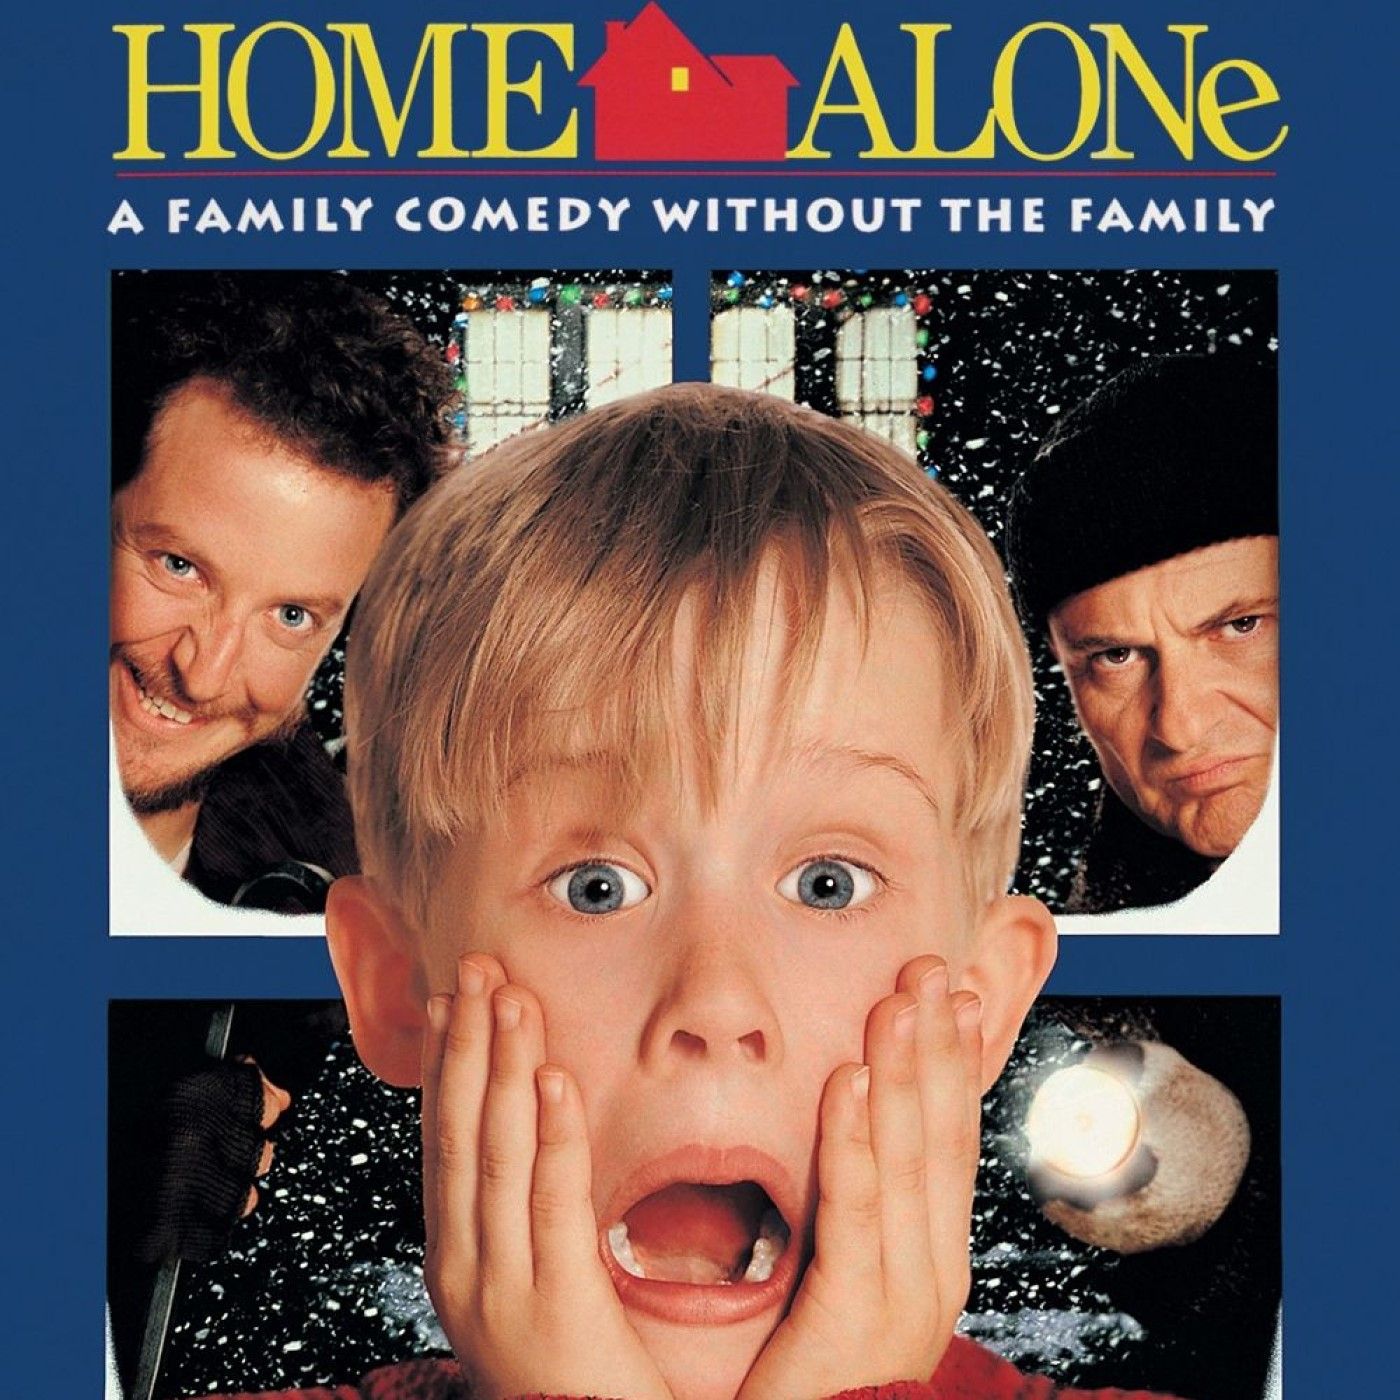 home not alone movie review